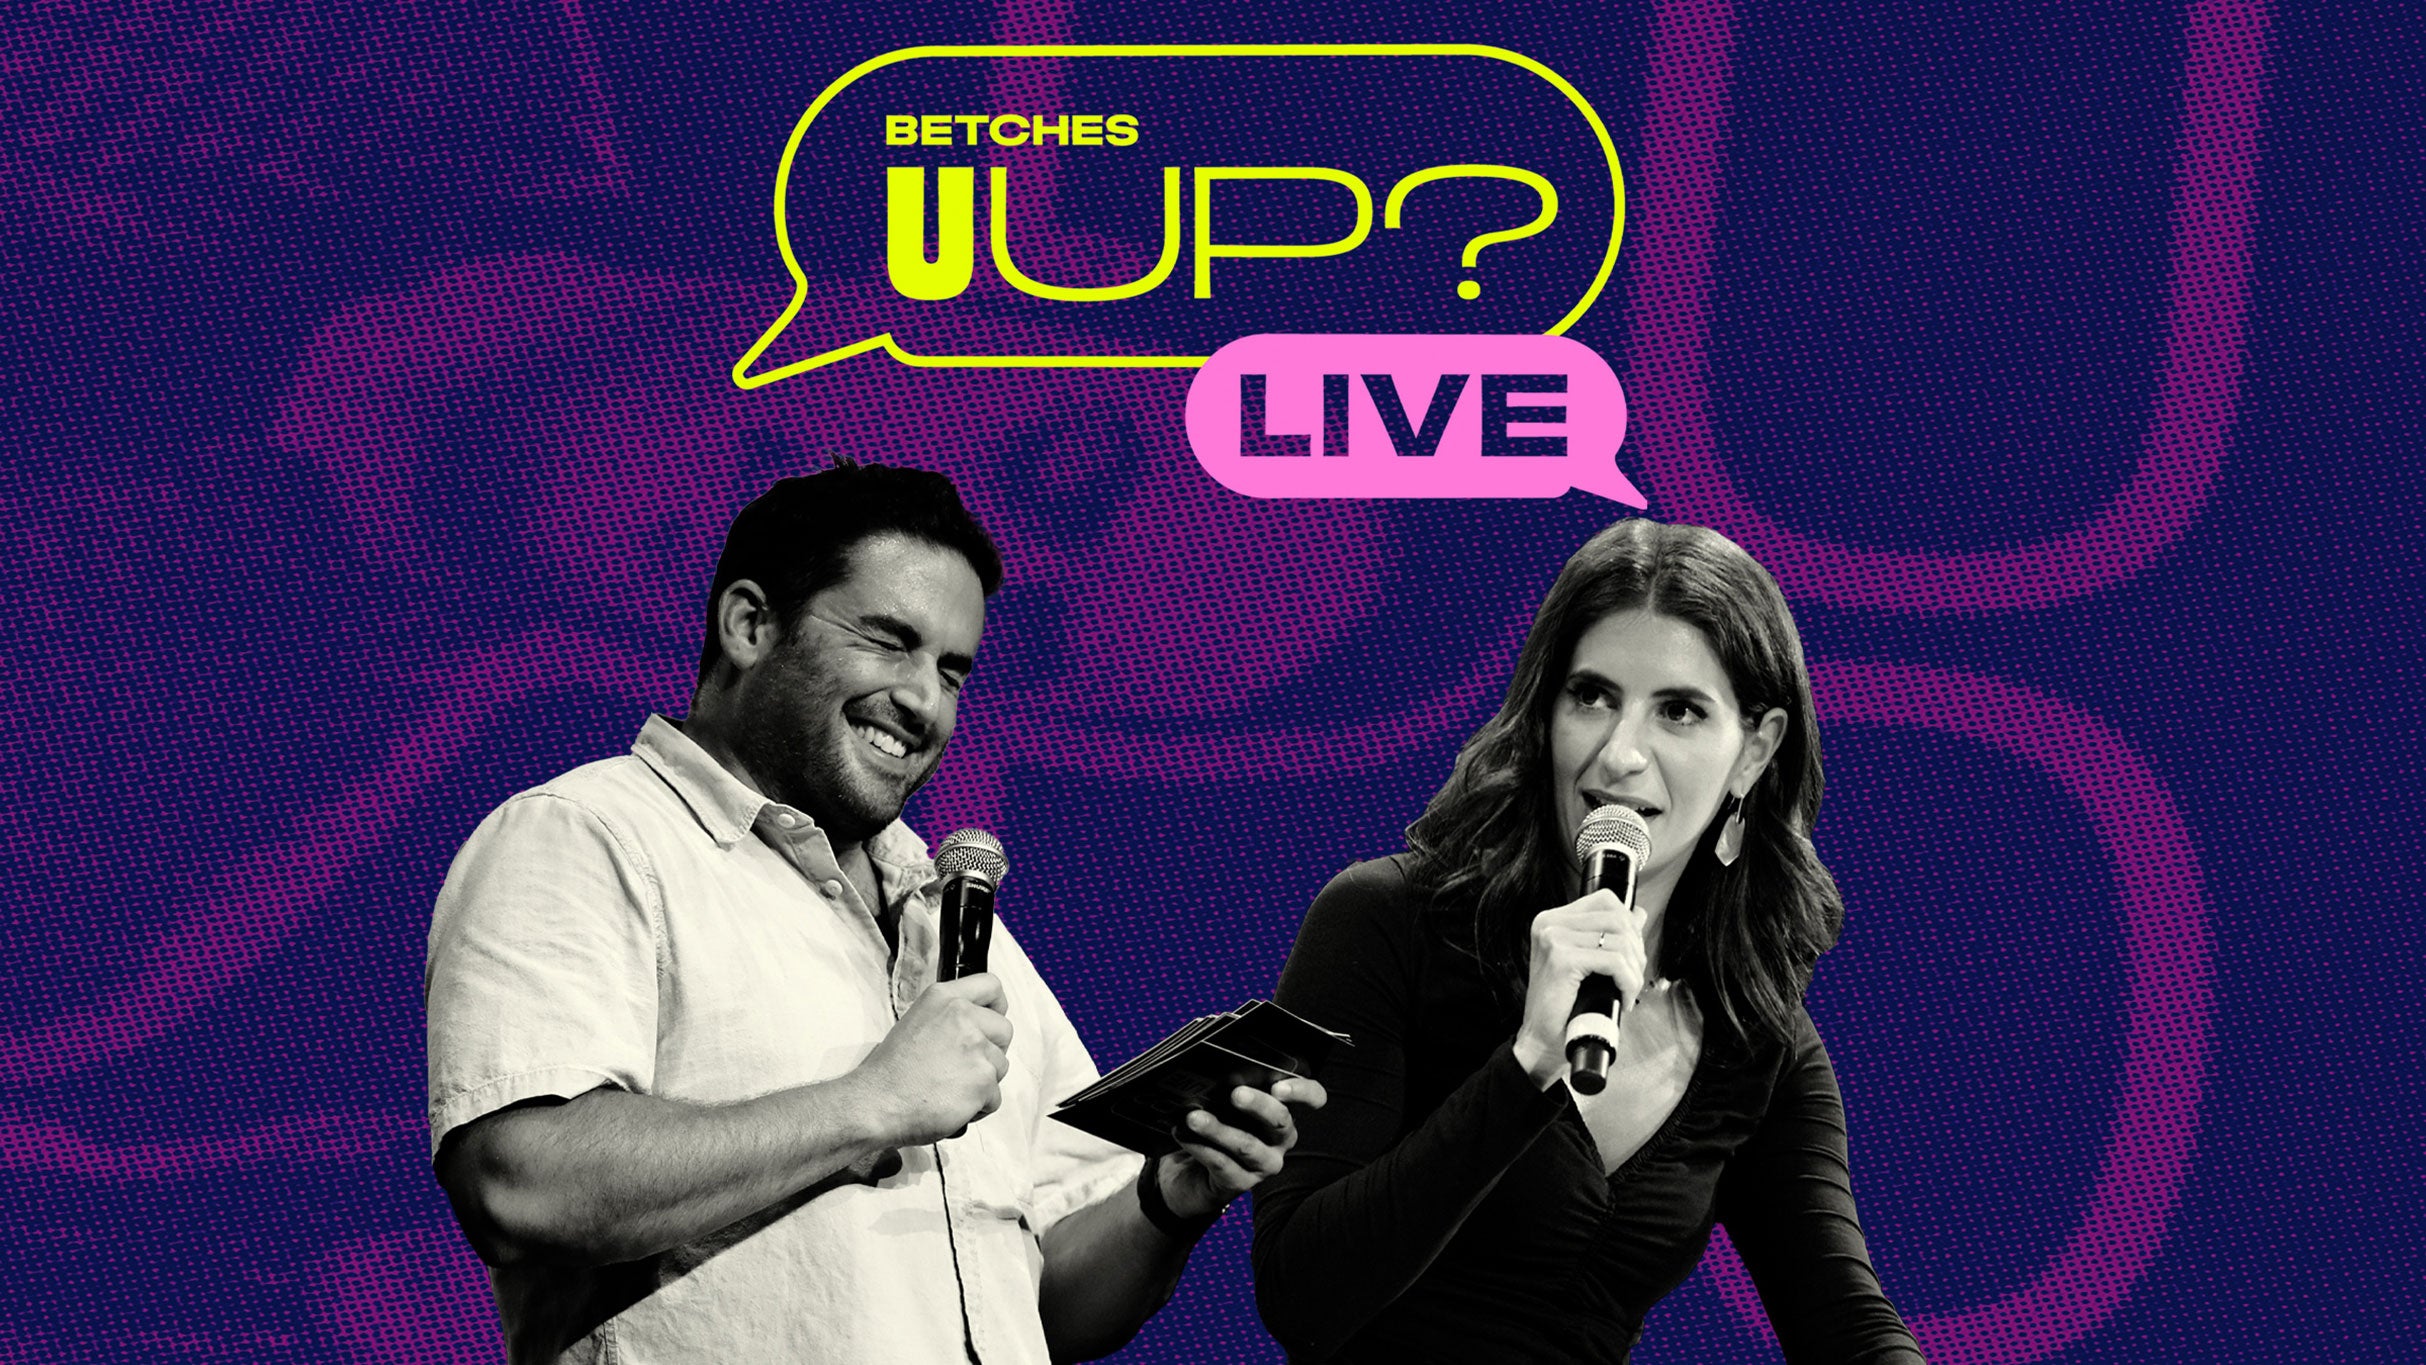 Betches U Up? Live Presented By Faux Pas free presale listing for show tickets in New York City, NY (Palladium Times Square )